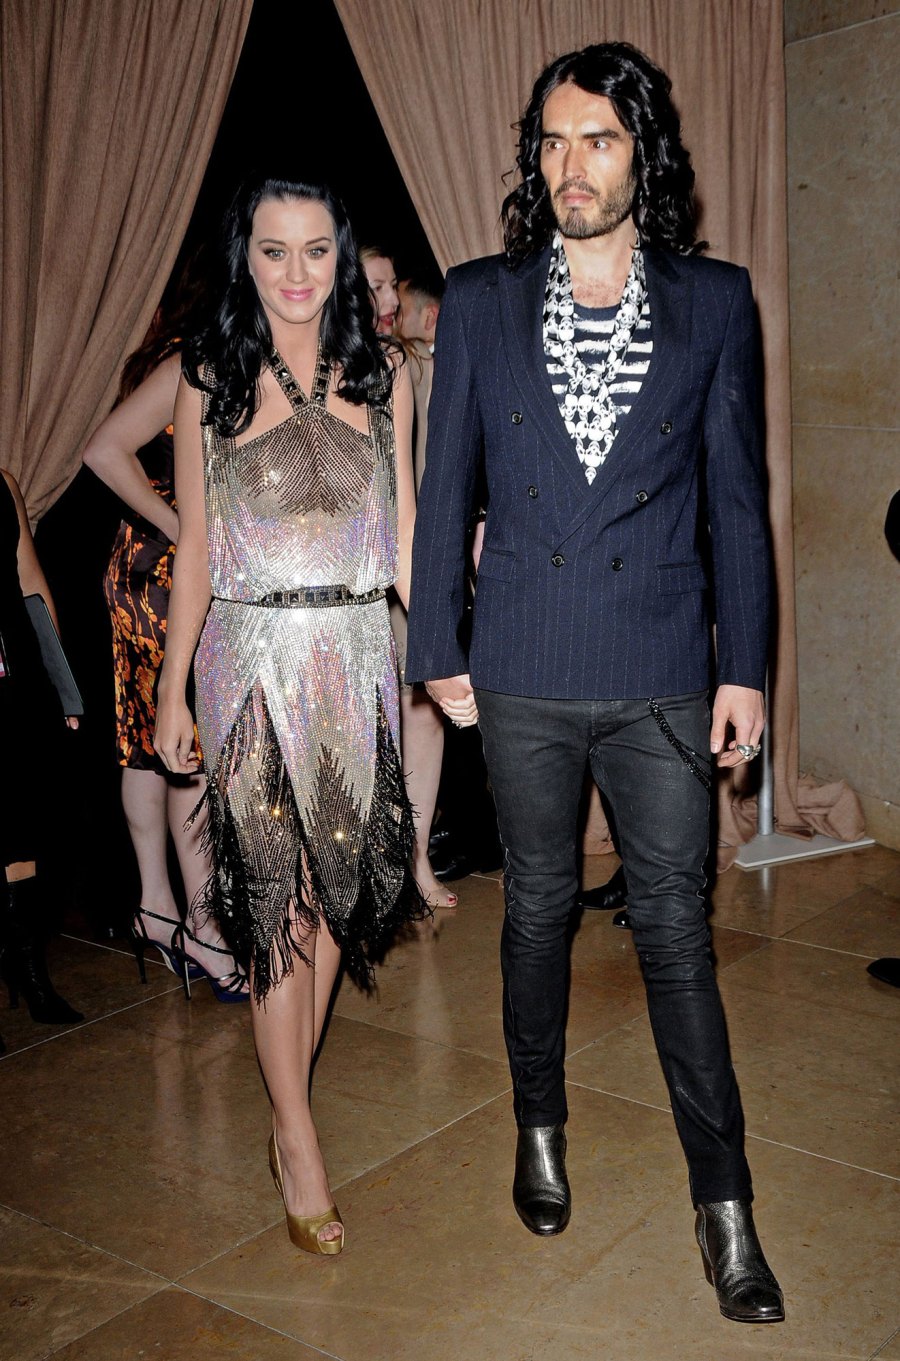 Meet Russell Brand's wife Laura Brand and their children: the British  comedian married her in 2017 after his divorce from Katy Perry – and they  share 2 children together, with a third